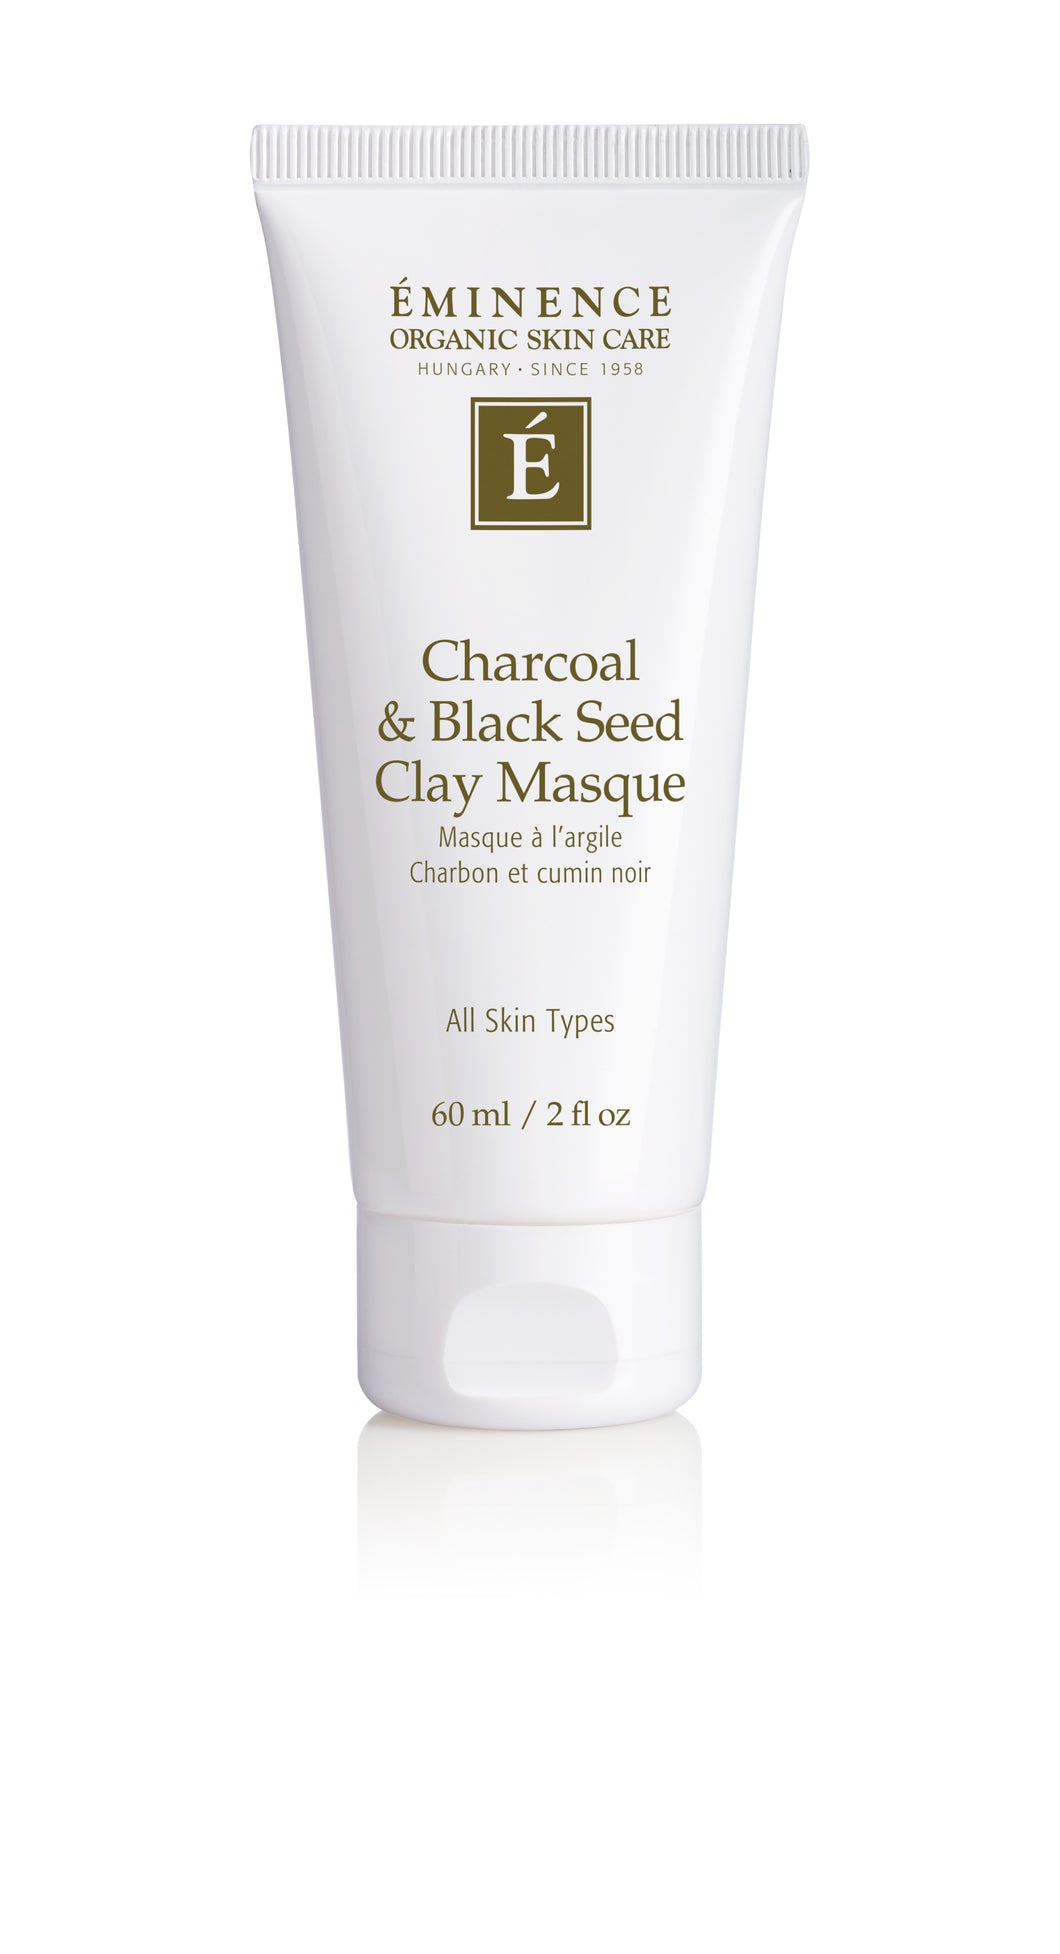 NEW! Charcoal & Black Seed Clay Masque